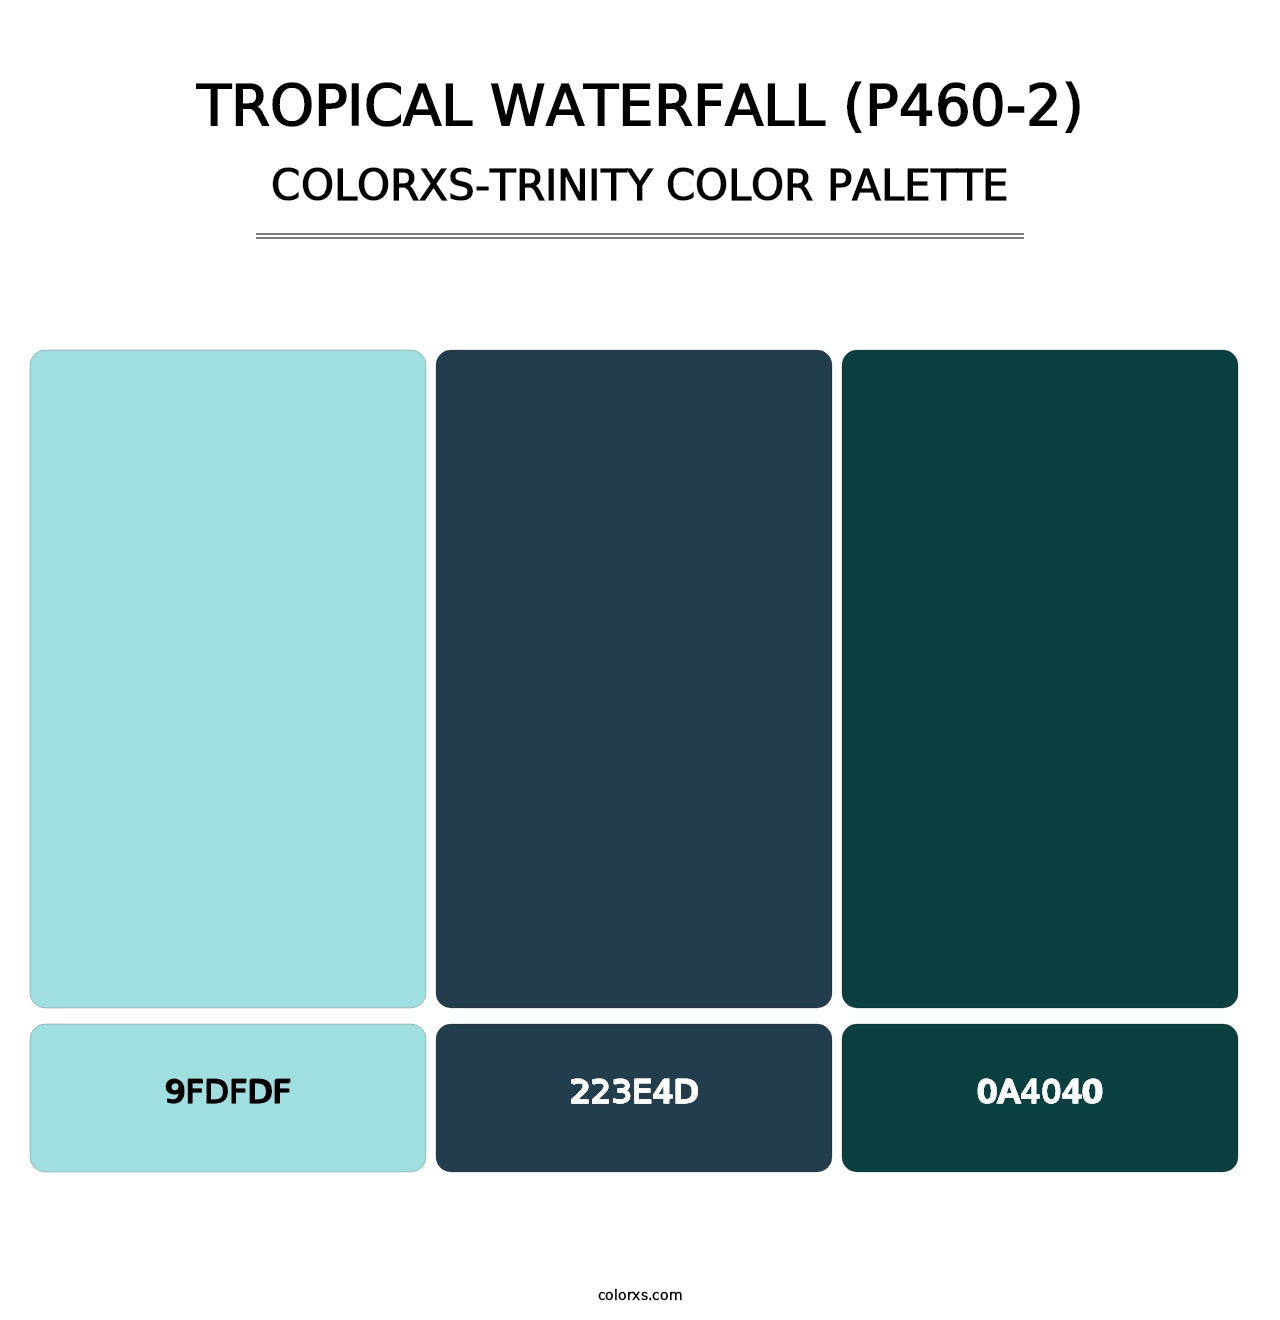 Tropical Waterfall (P460-2) - Colorxs Trinity Palette